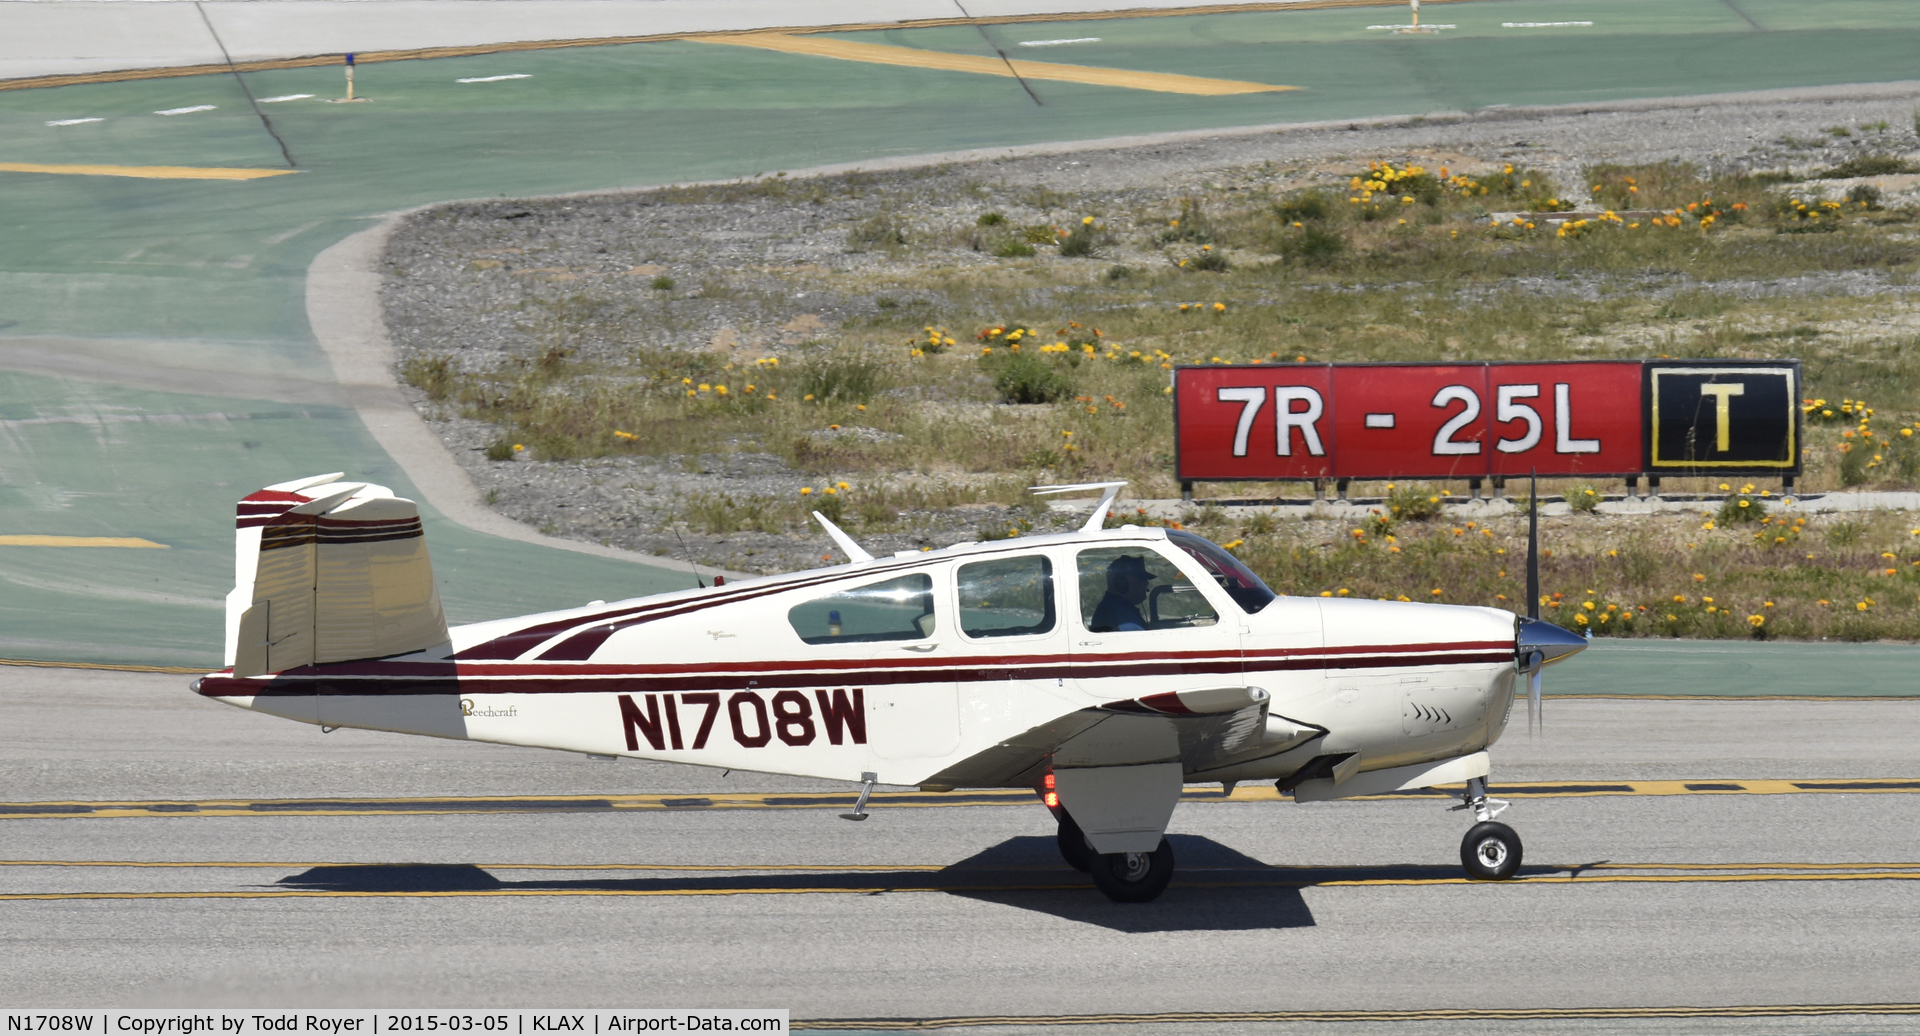 N1708W, 1964 Beech S35 Bonanza C/N D-7340, Taxiing to parking at LAX